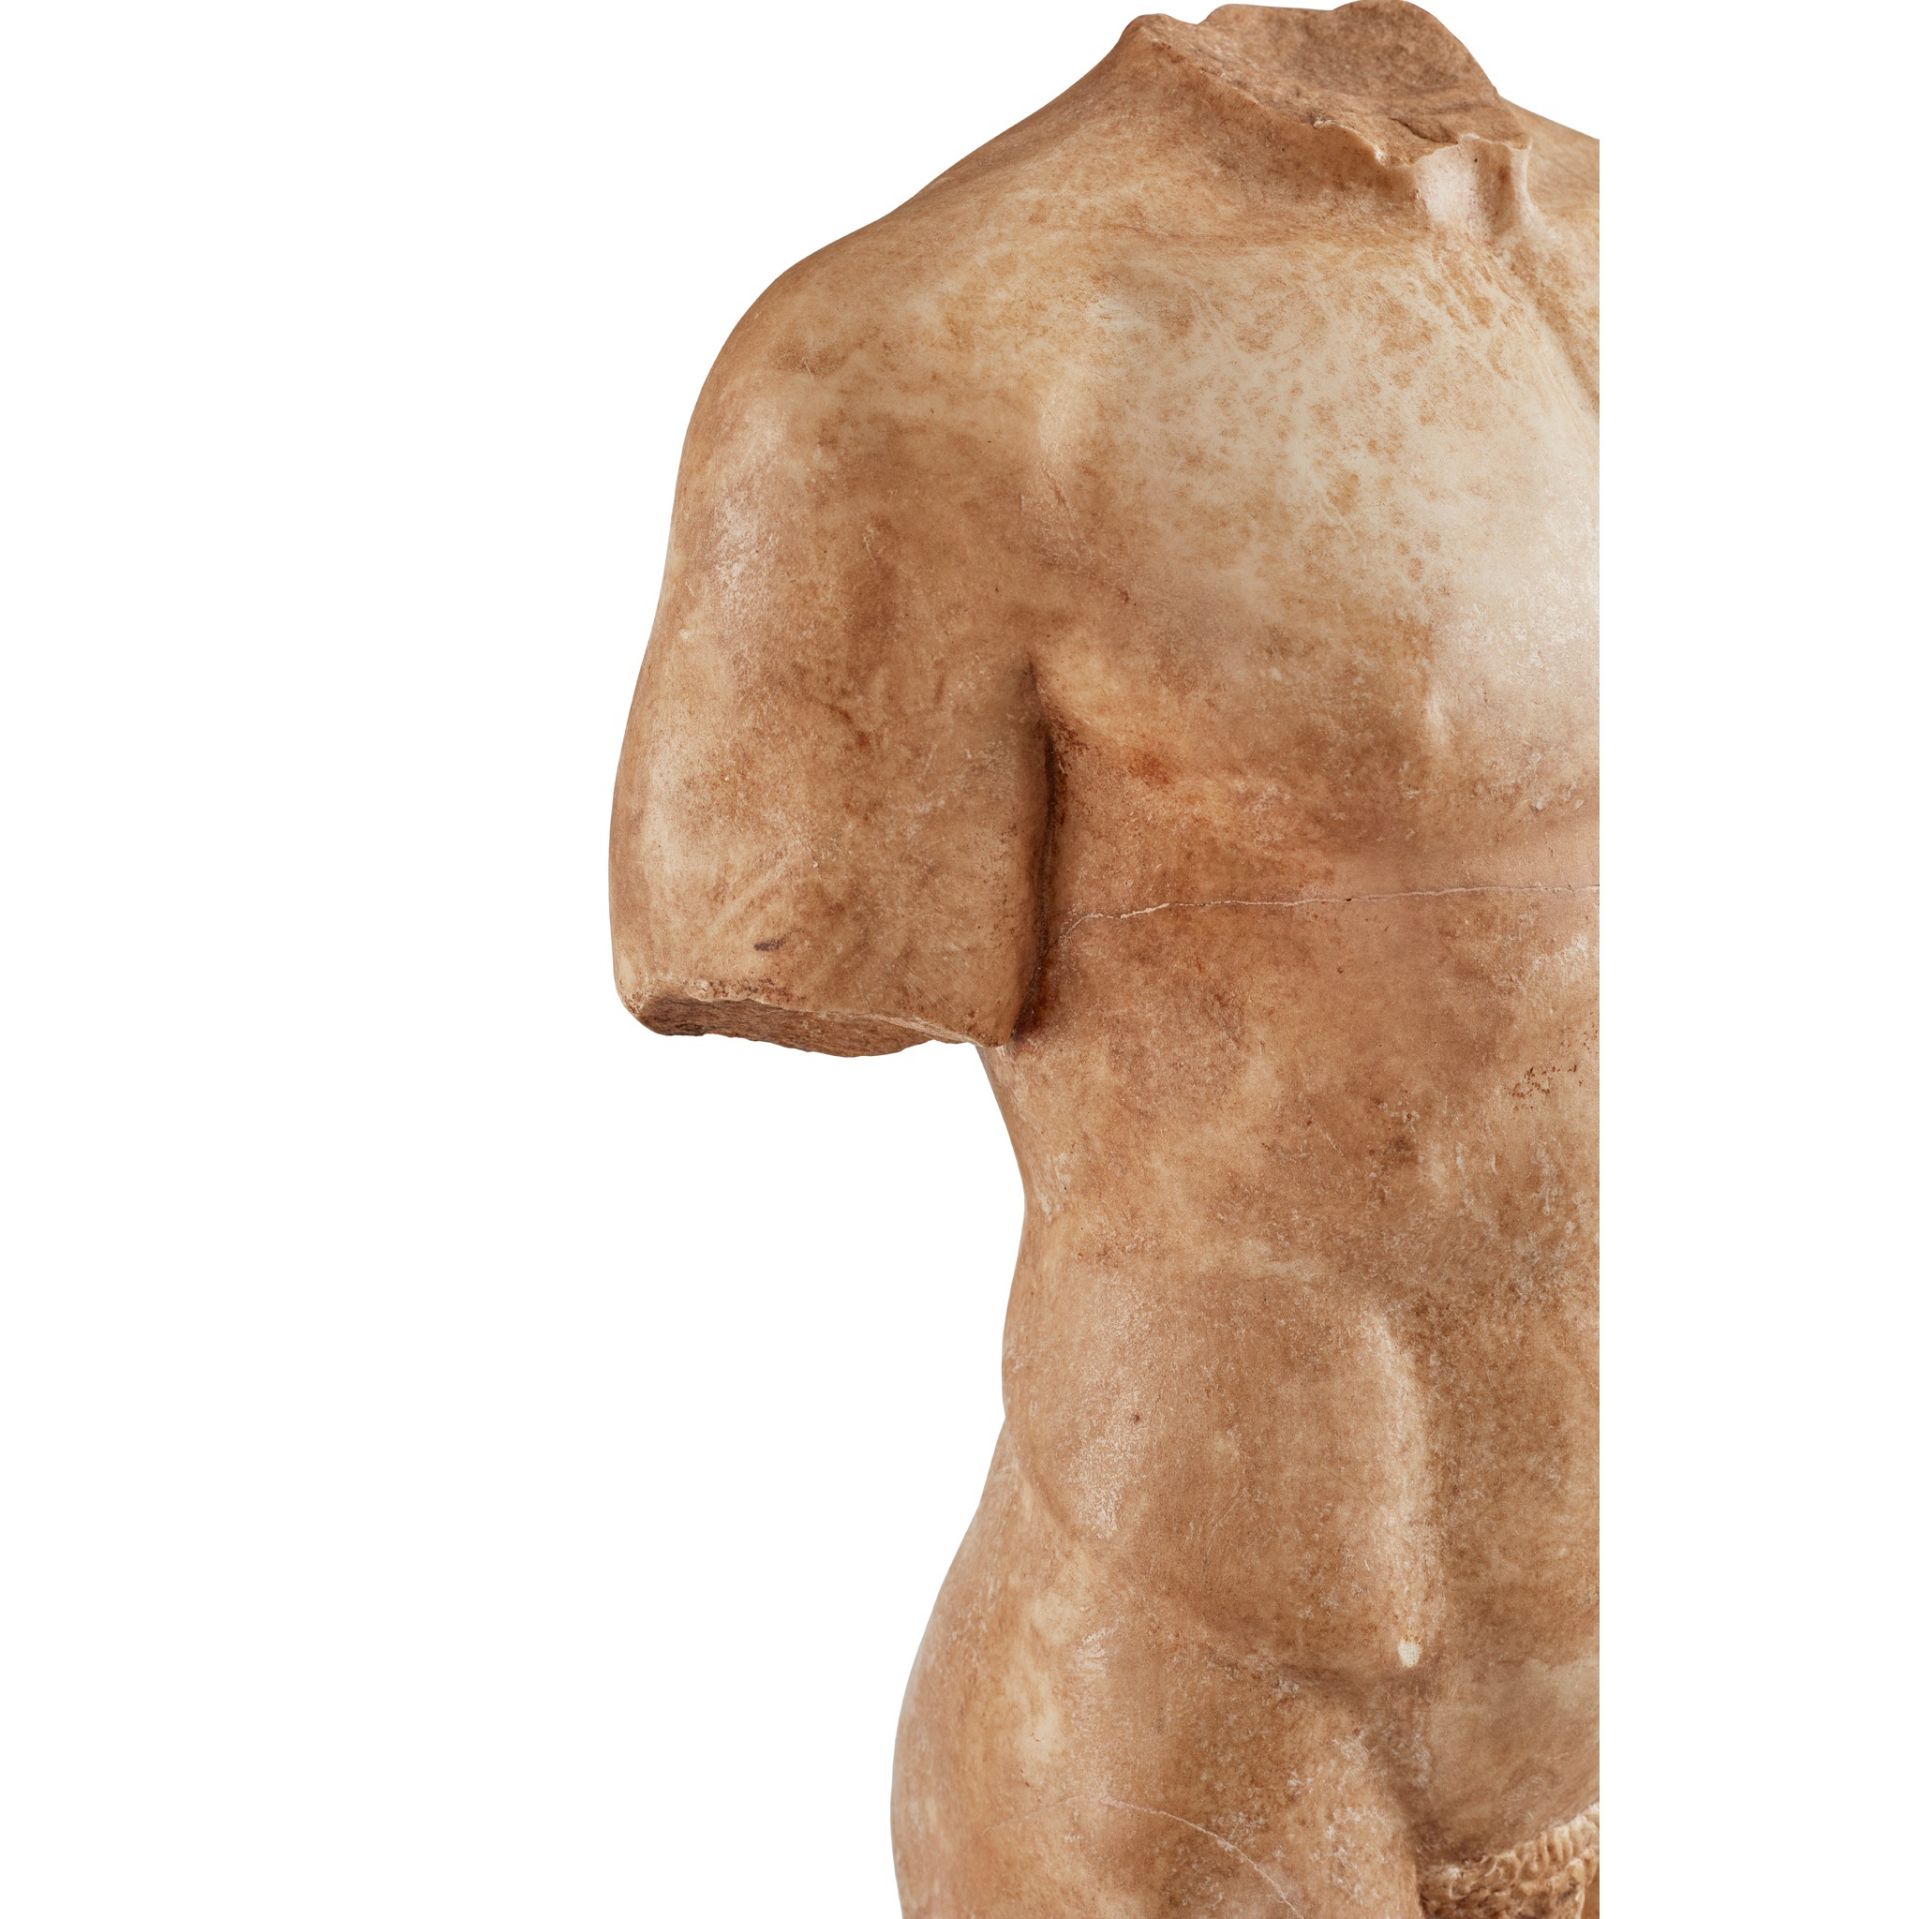 ◆ LIFE-SIZED ANCIENT ROMAN MARBLE TORSO OF A YOUNG MAN C. 1ST - 2ND CENTURY AD - Image 7 of 13